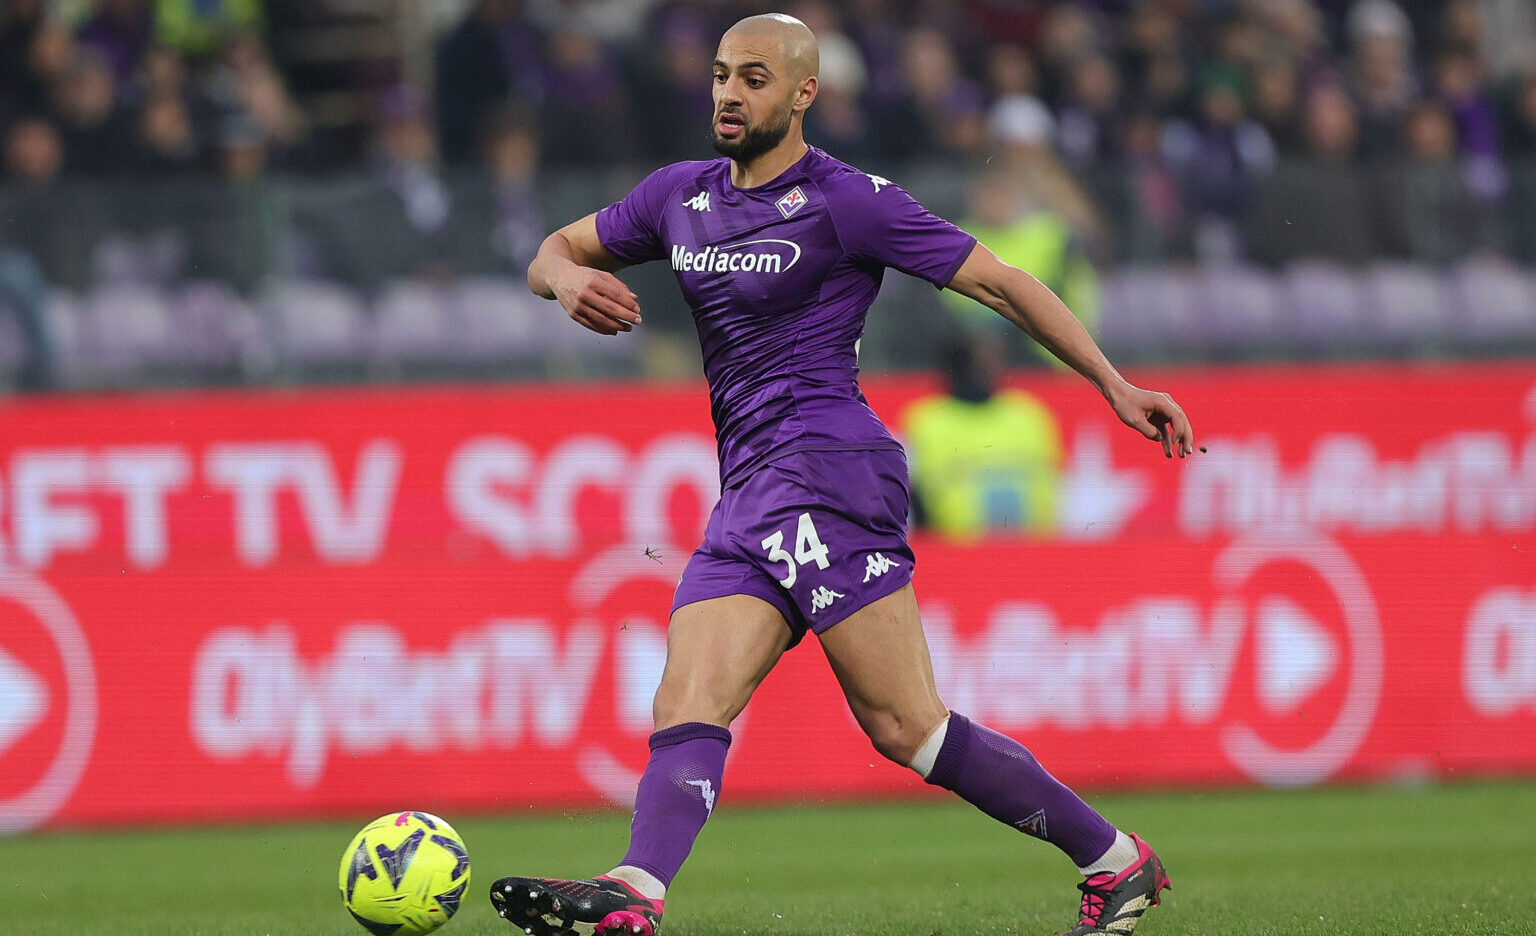 FLORENCE, ITALY - MARCH 19: Sofyan Amrabat of ACF Fiorentina in action during the Serie A match between ACF Fiorentina and US Lecce at Stadio Artemio Franchi on March 19, 2023 in Florence, Italy.  (Photo by Gabriele Maltinti/Getty Images)